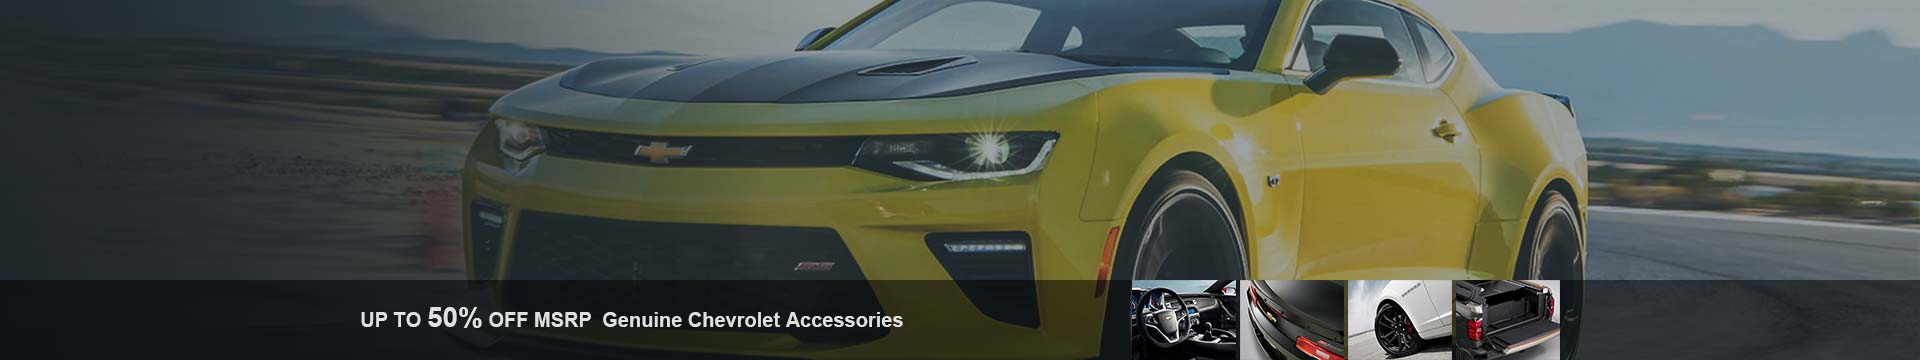 Shop Chevrolet Monte Carlo accessories with lowest prices